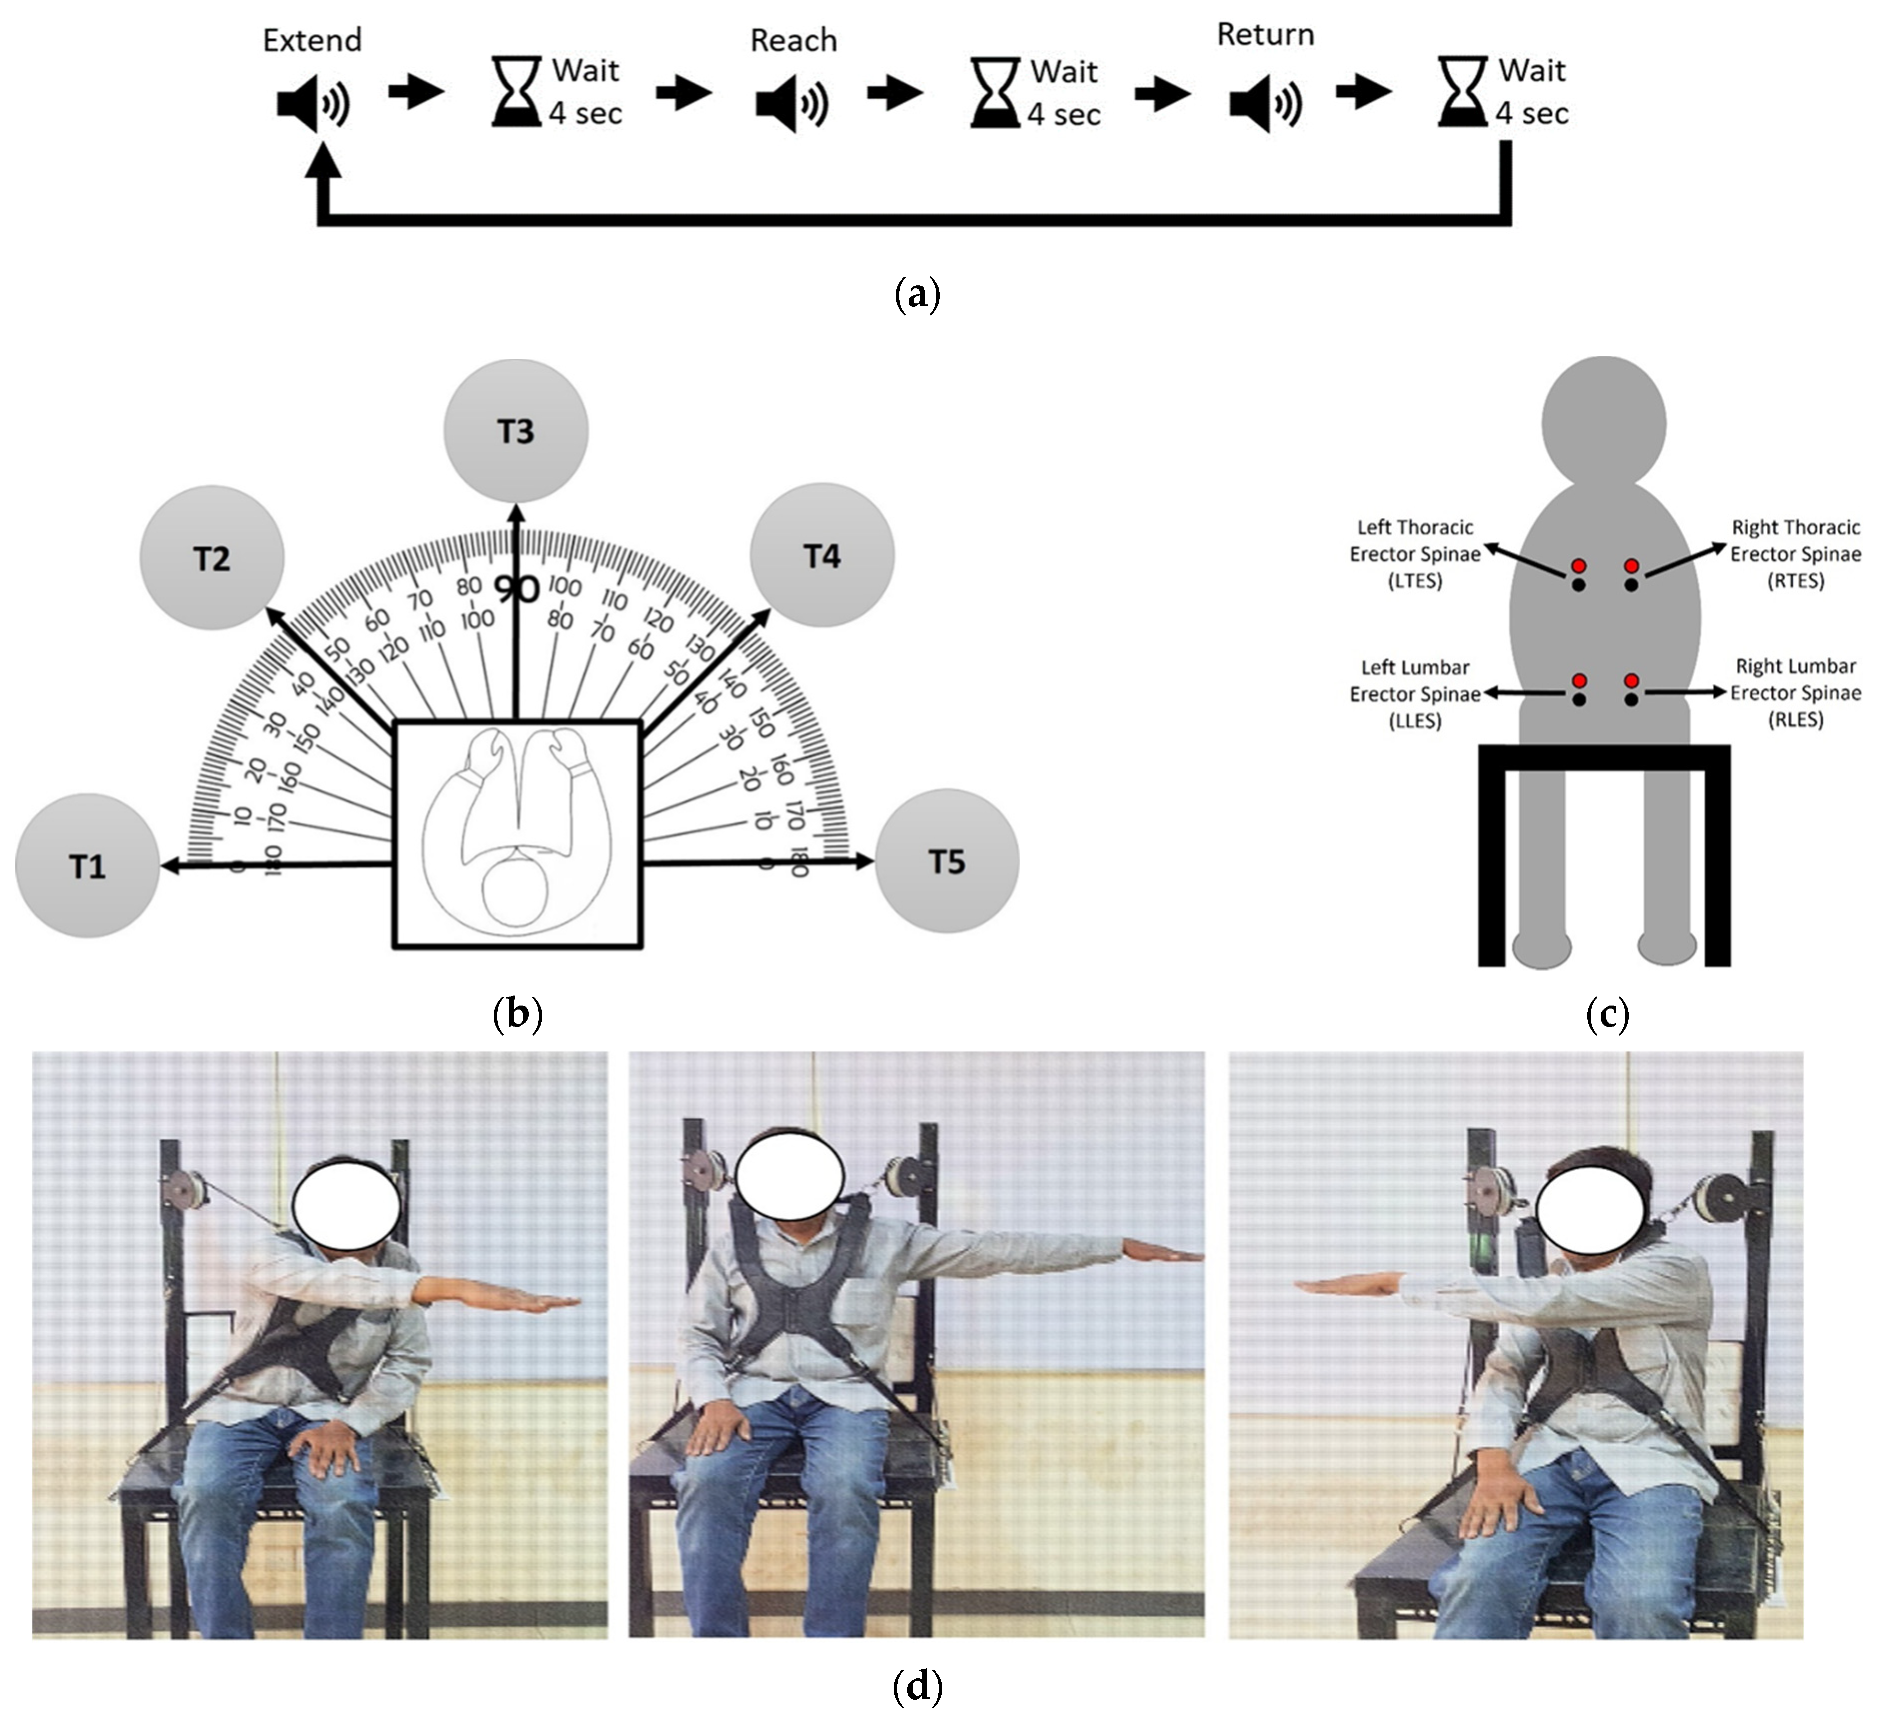 a case study on designing a passive feeding assistive orthosis for arthrogryposis